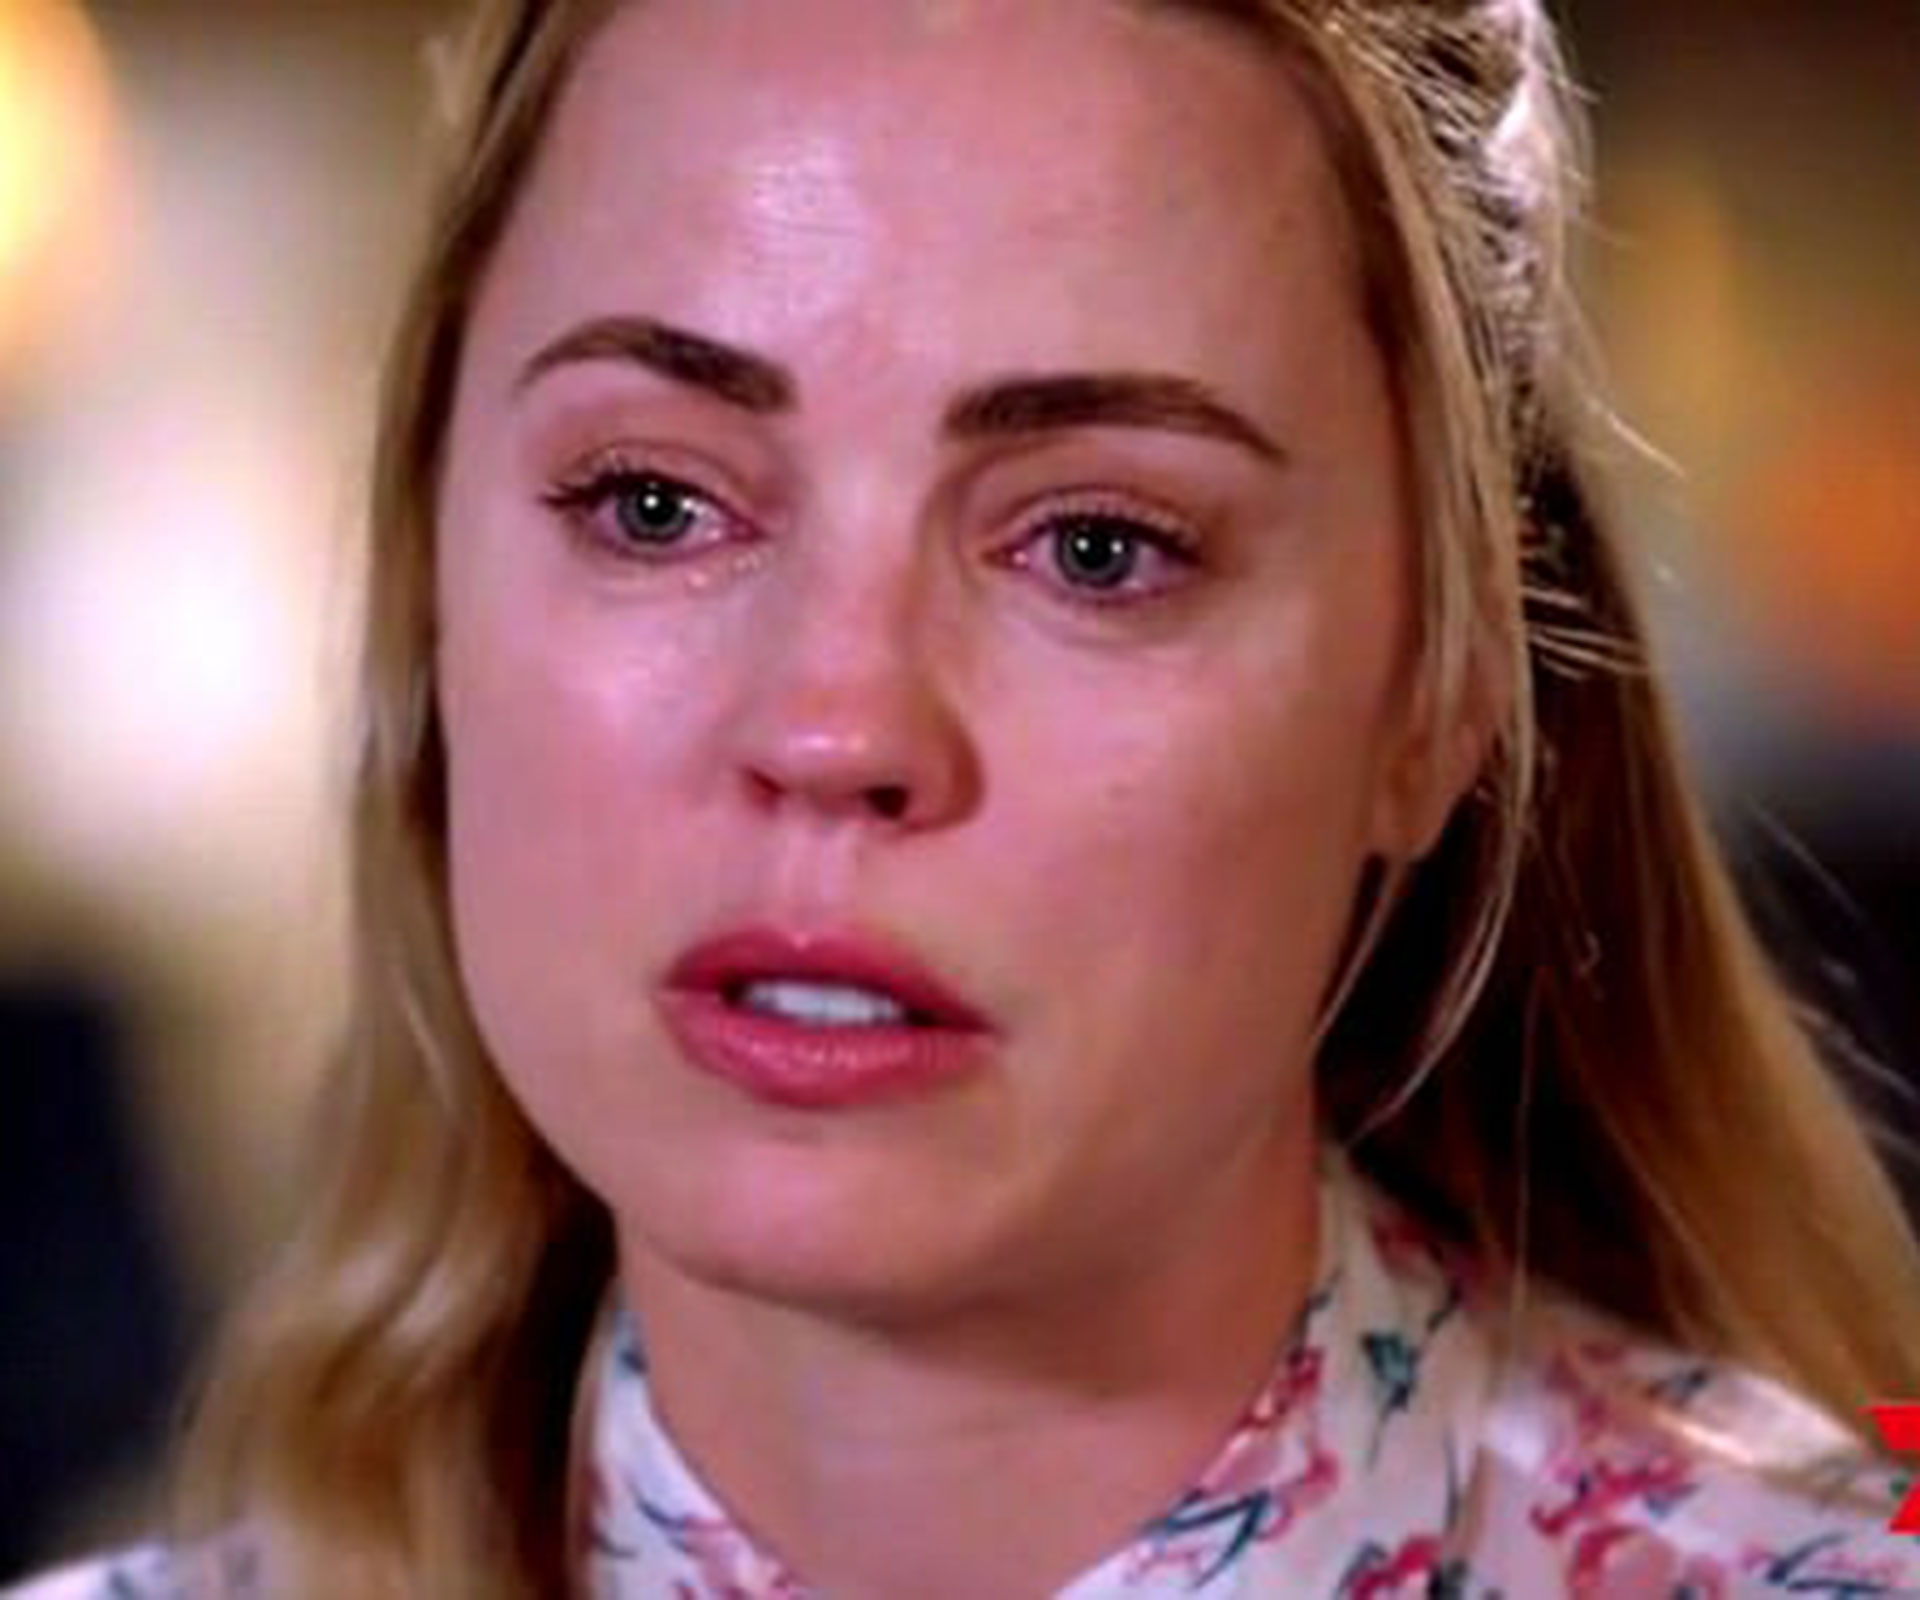 Melissa George reveals horrific injury pictures as she asks Australia for help